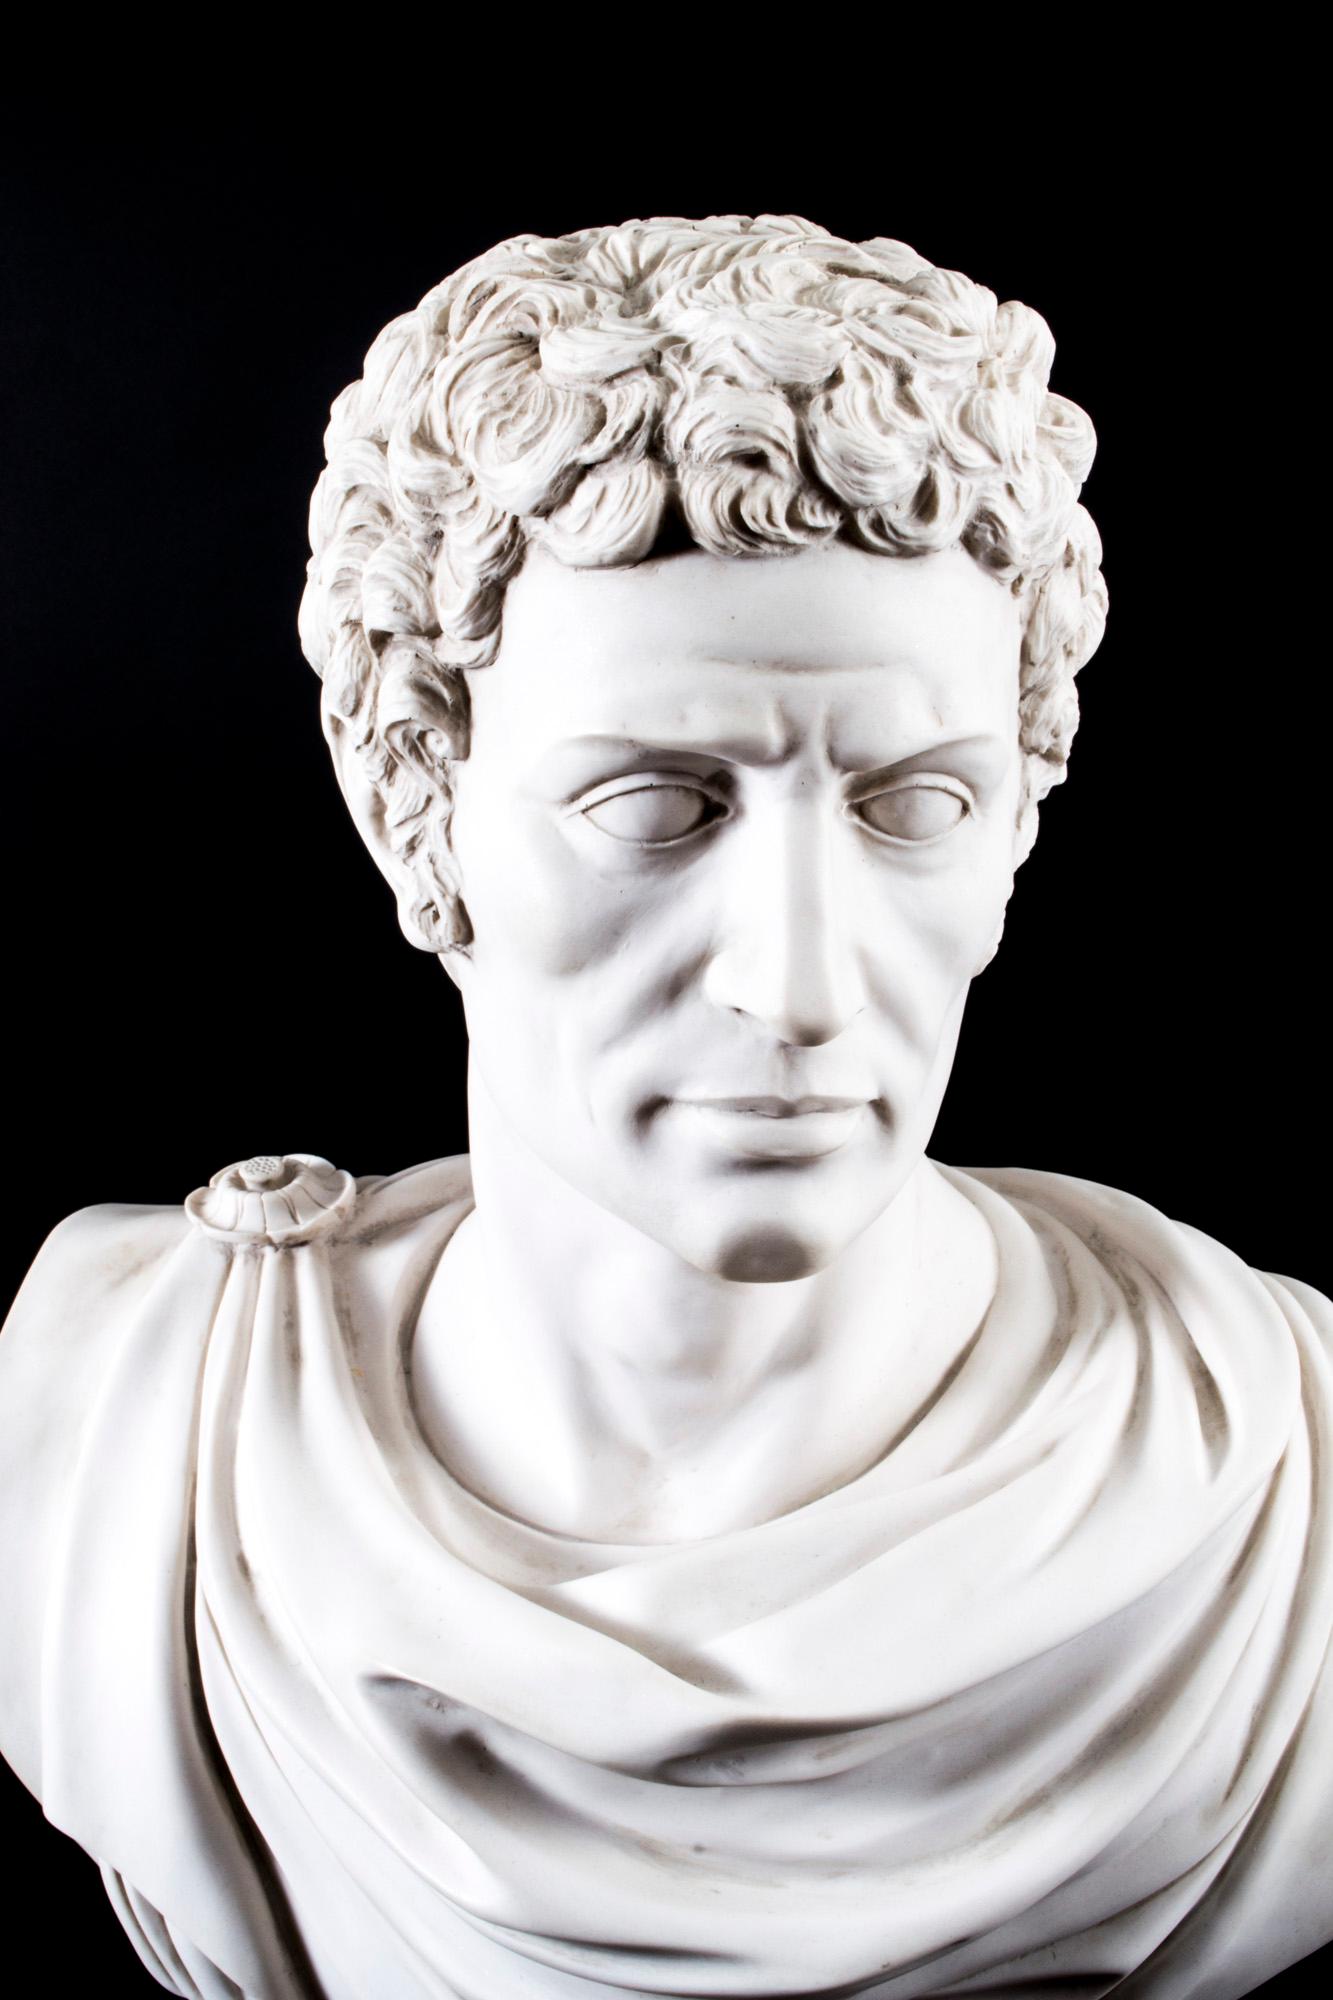 A beautifully sculpted marble bust of the famous Roman general Lucius Junius Brutus dating from the last quarter of the 20th century.

He is wearing a flowing toga with a fibulae or broach holding it in place.

This high quality bust is made from